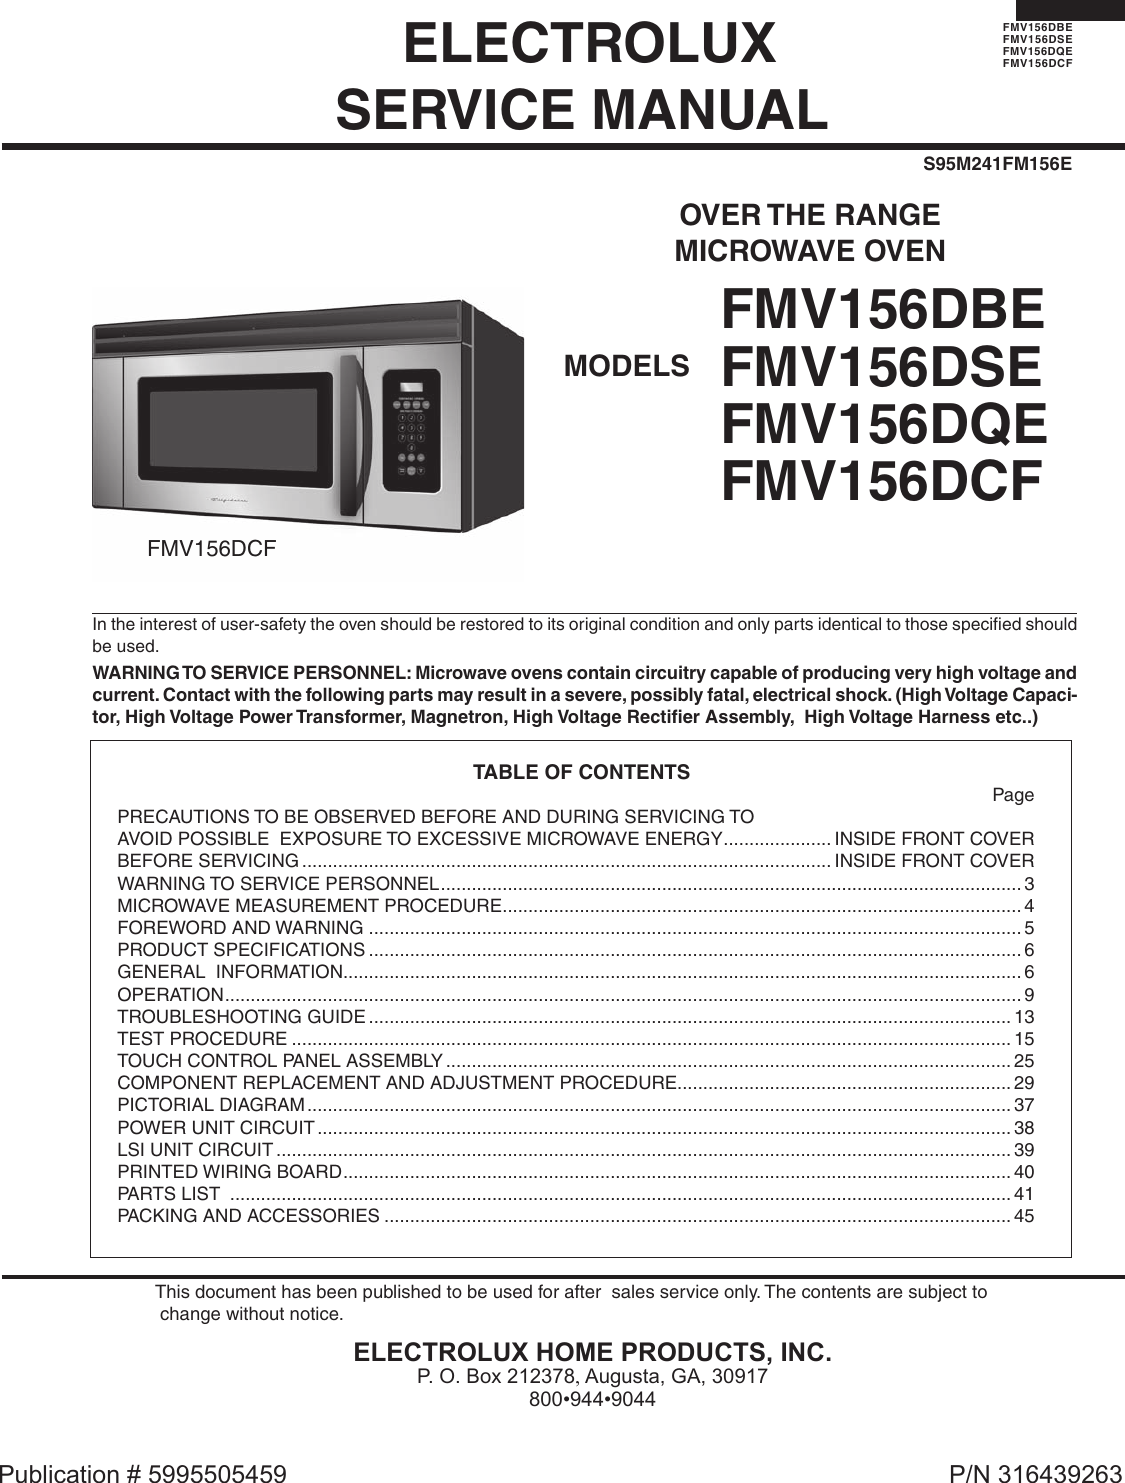 Electrolux Microwave Oven Fmv156Dbe Users Manual